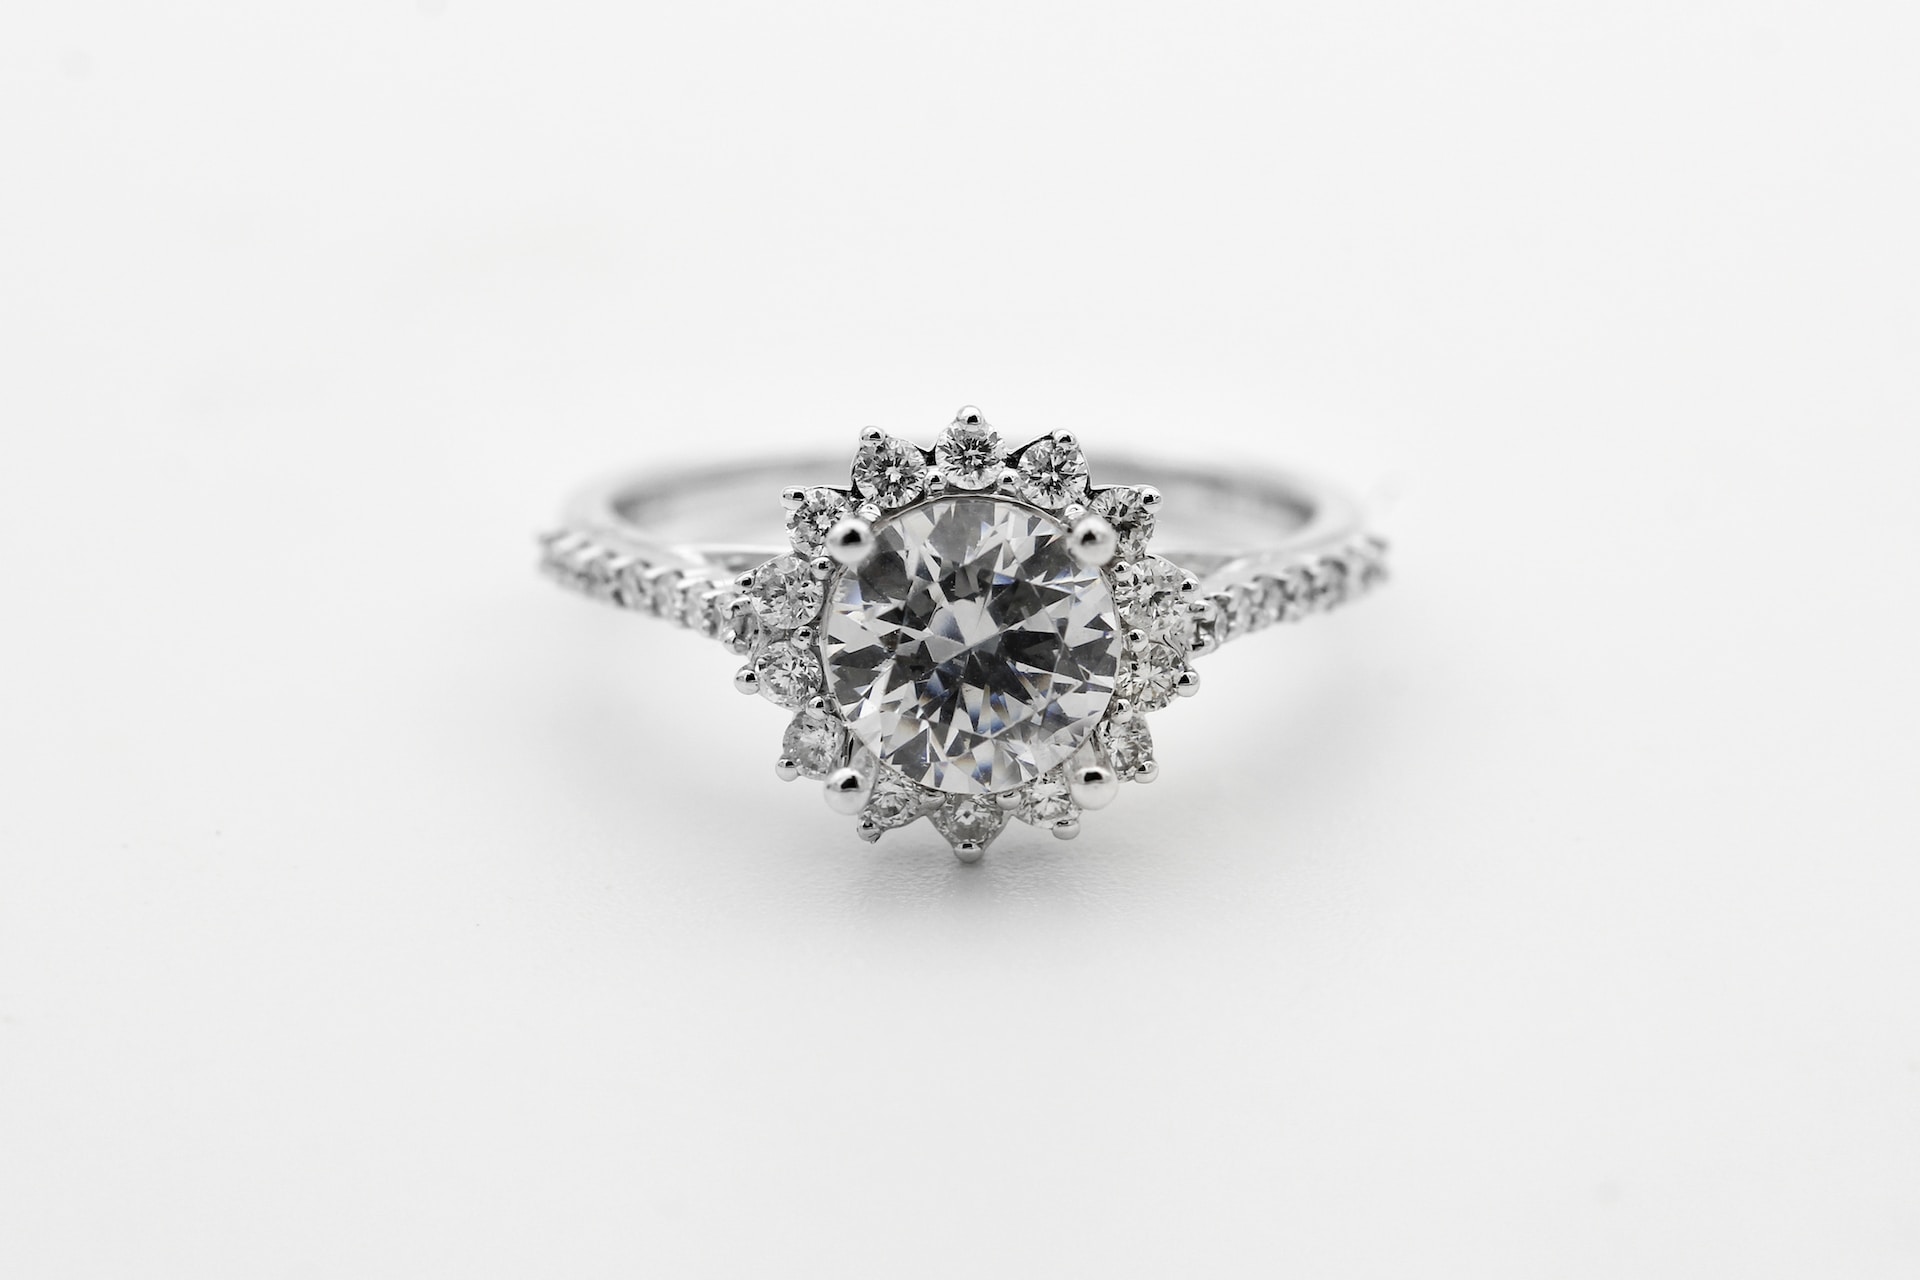 a platinum diamond engagement ring with a blooming halo and diamonds all around the band.